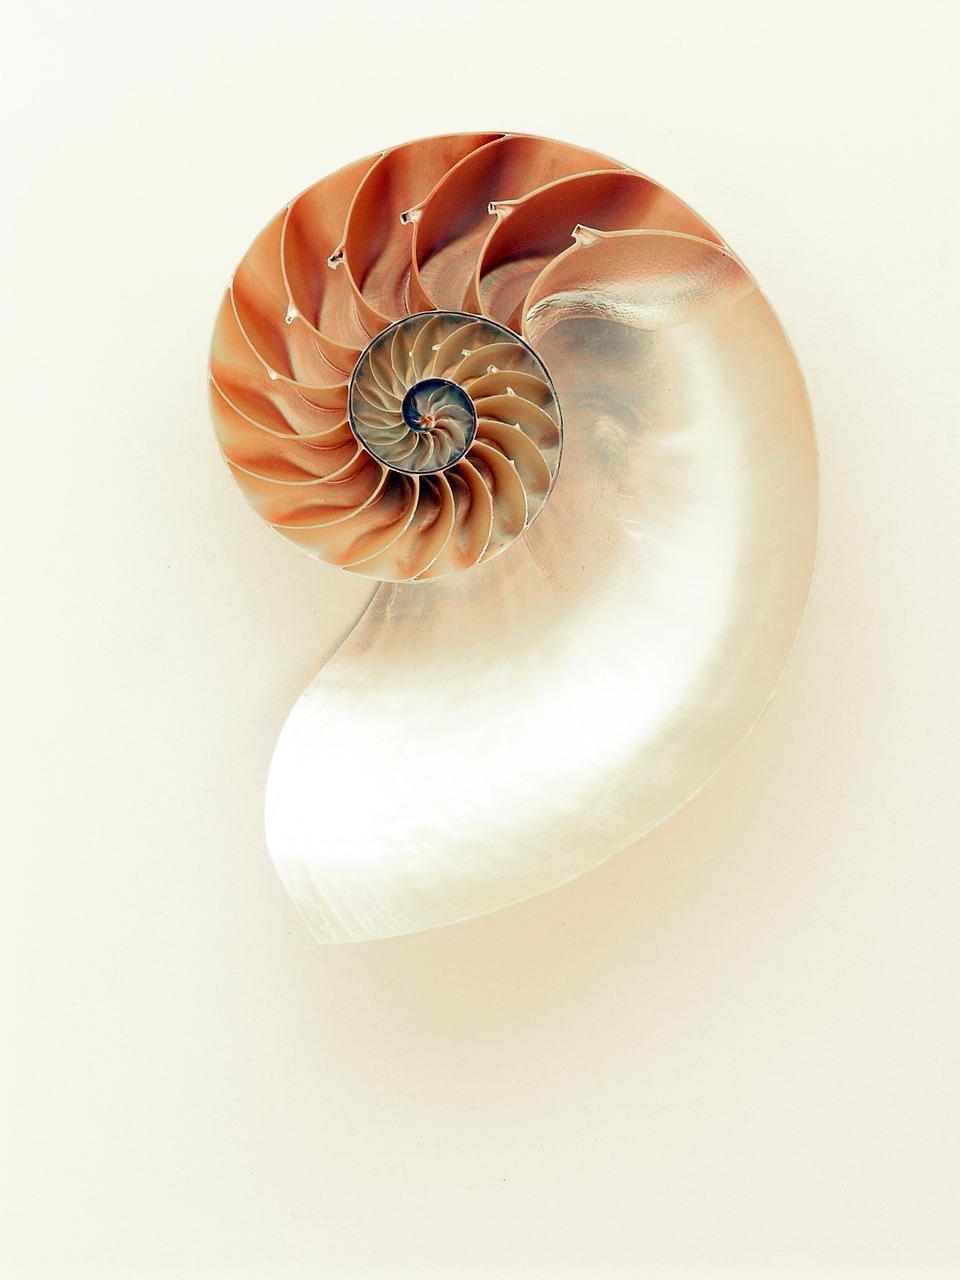 a close up of a shell on a white surface, inspired by Anna Füssli, shutterstock contest winner, arabesque, fibonacci sequence, “hyper realistic, spiral horns!, miniature product photo